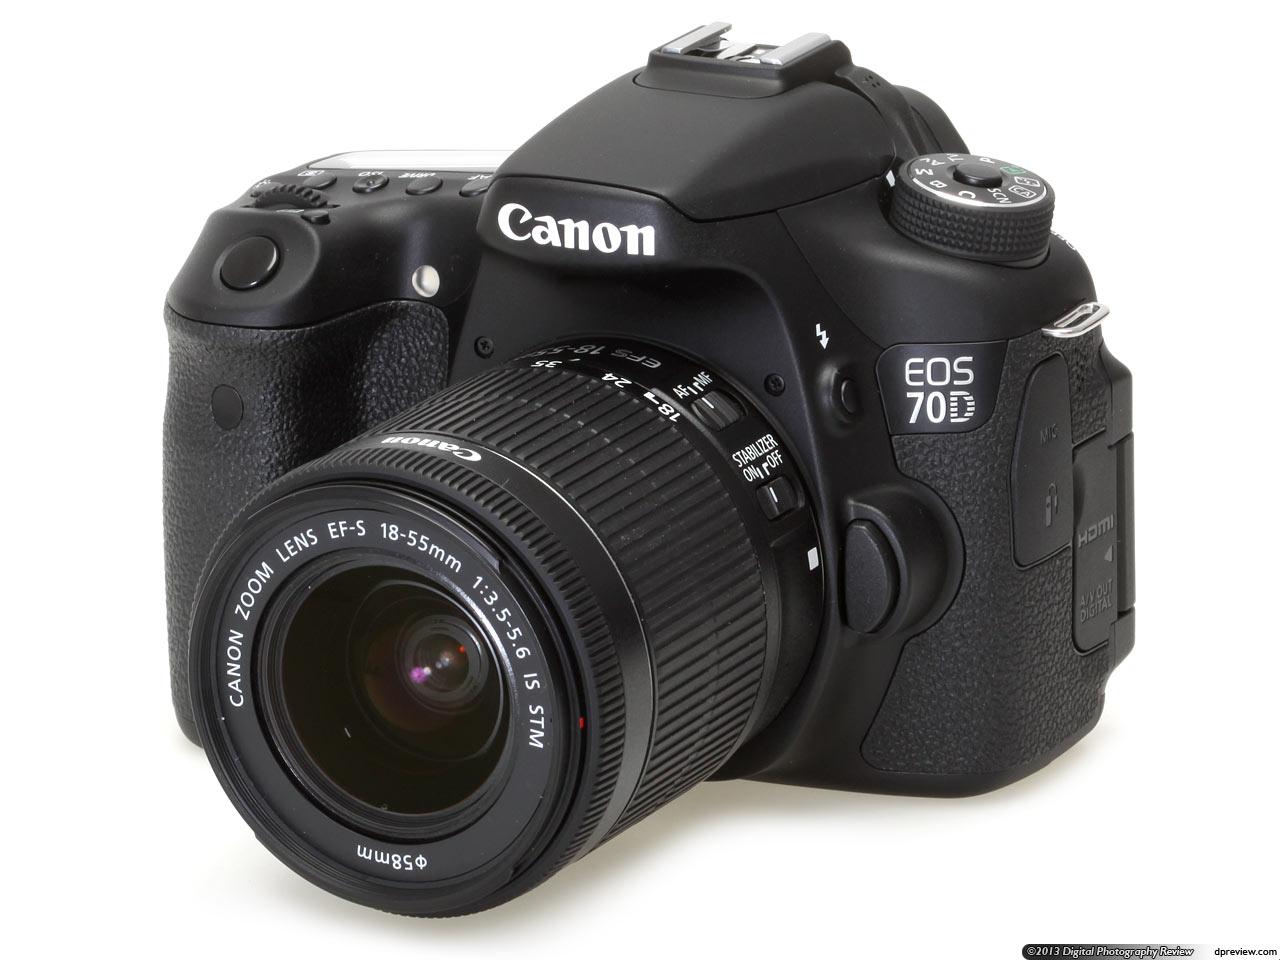 Review based on a production Canon EOS 70D